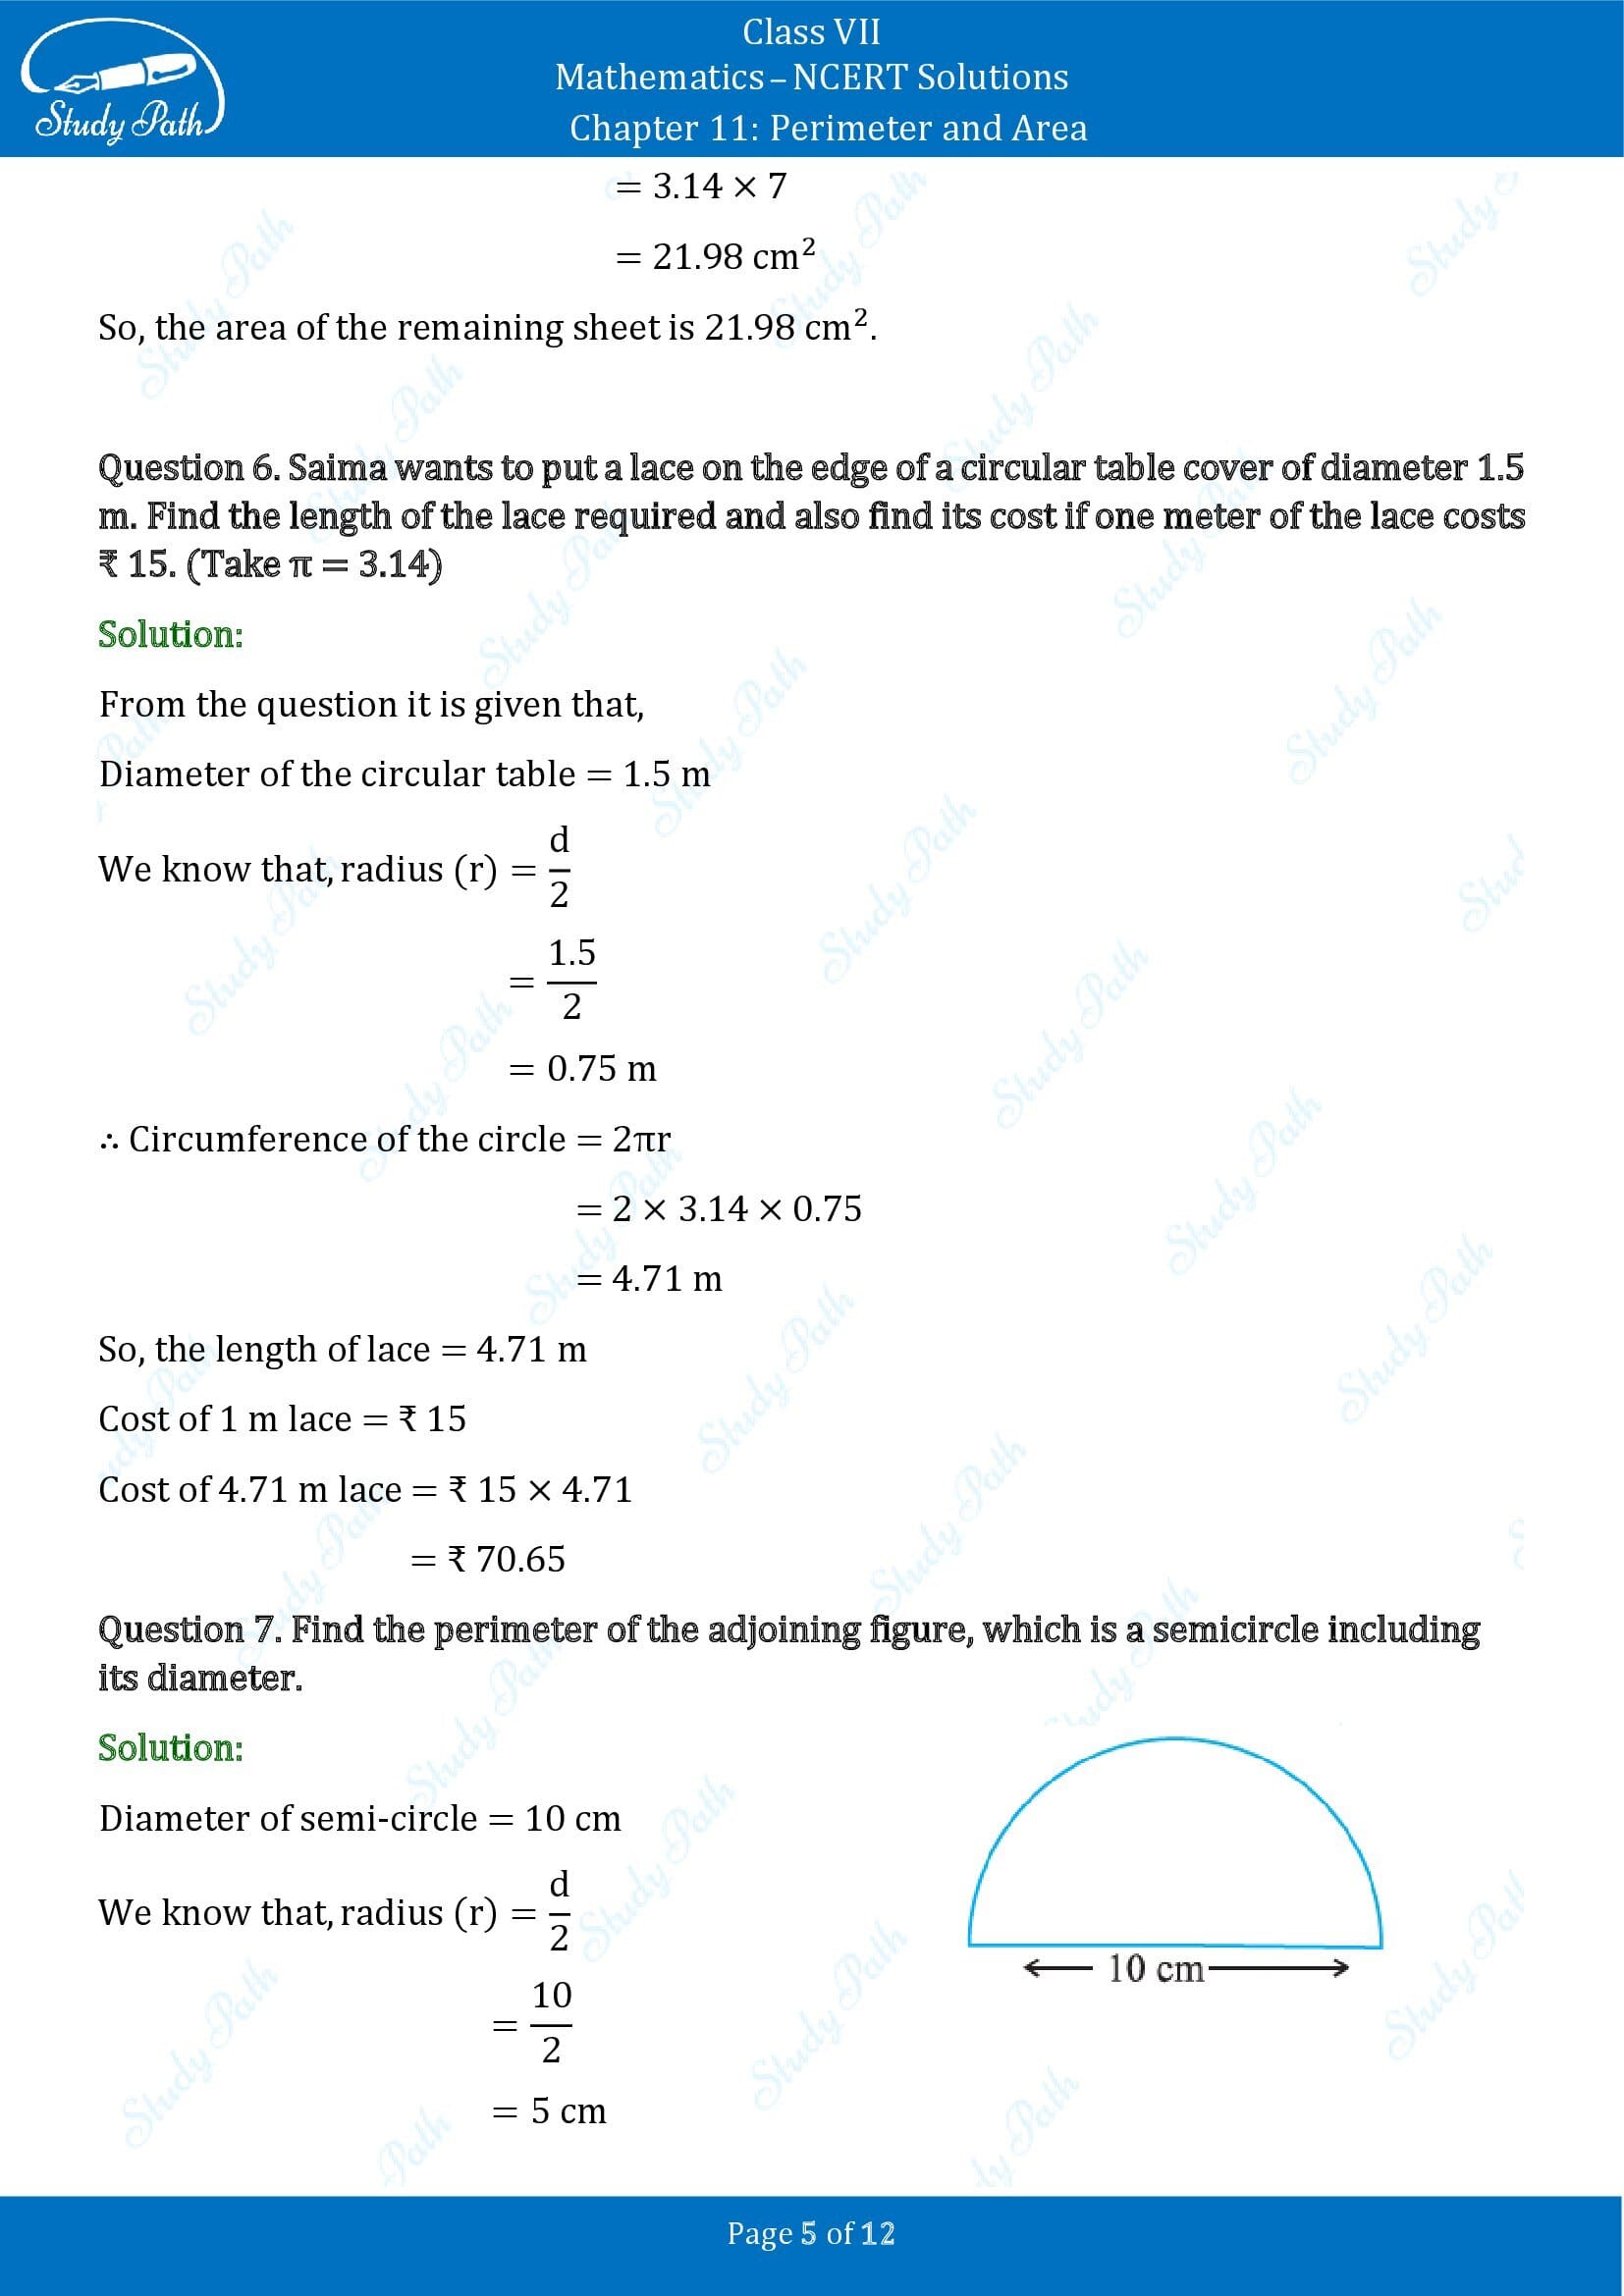 NCERT Solutions for Class 7 Maths Chapter 11 Perimeter and Area Exercise 11.3 00005